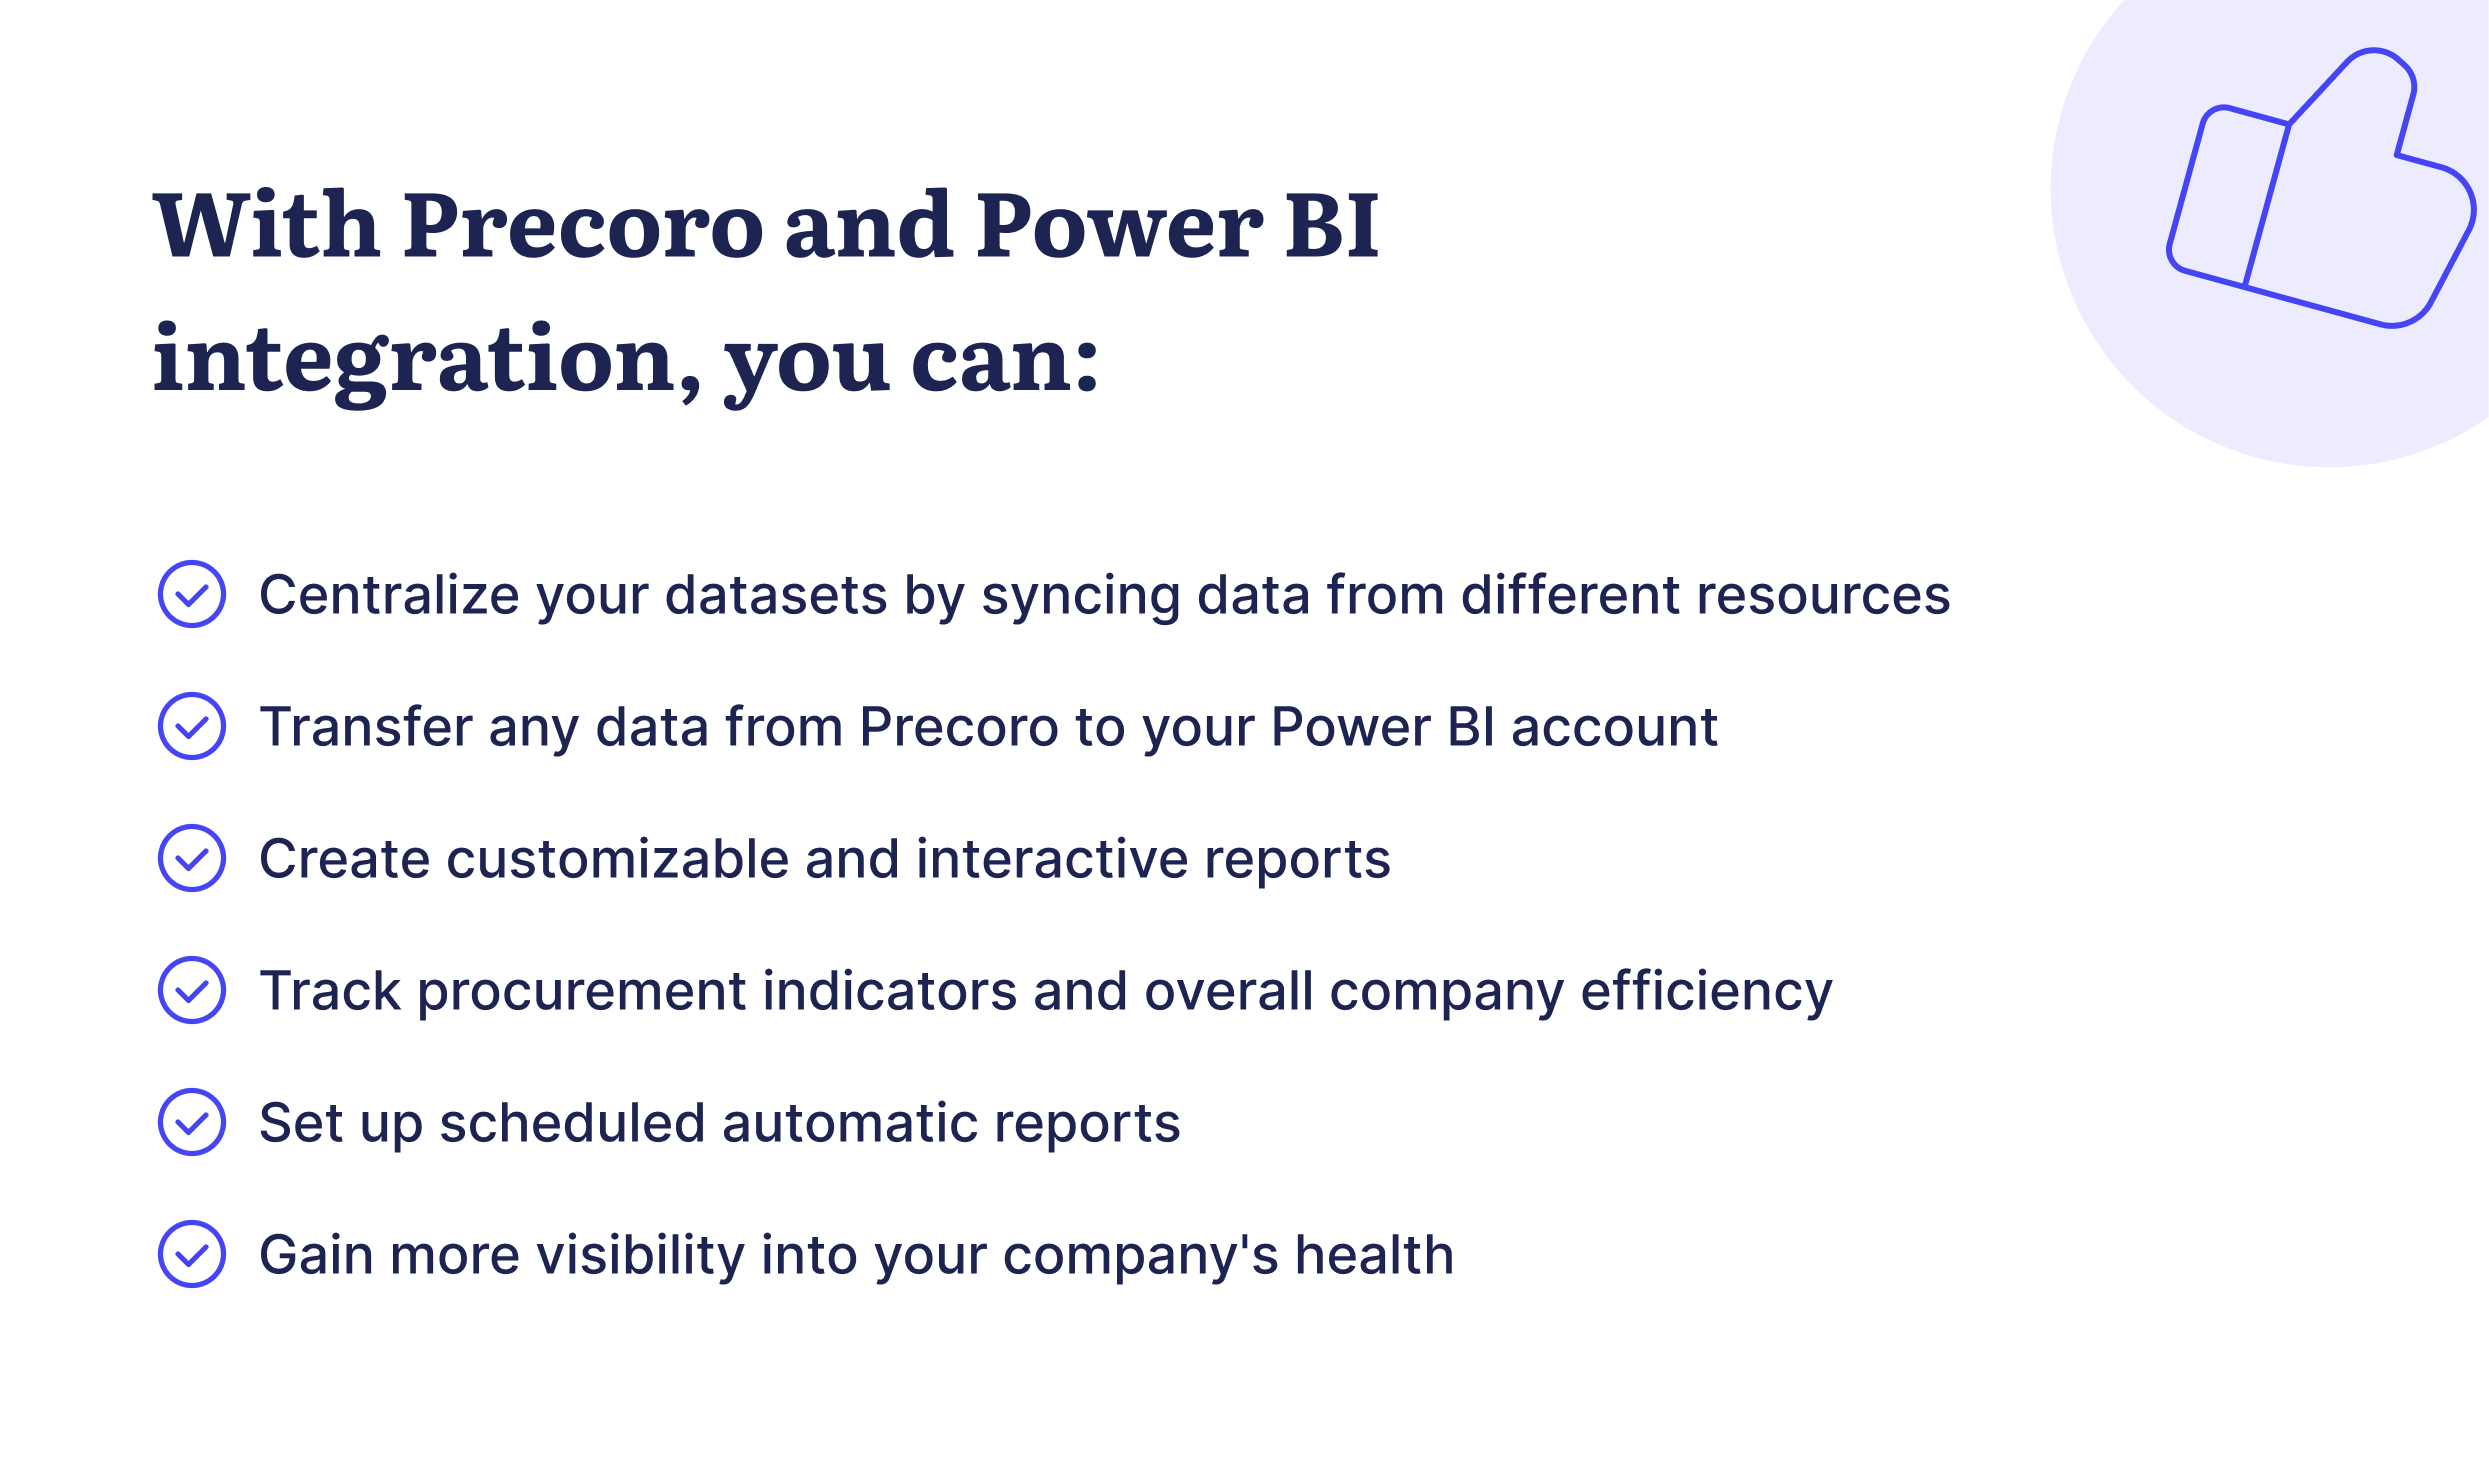 what you can do with precoro and power bi integration